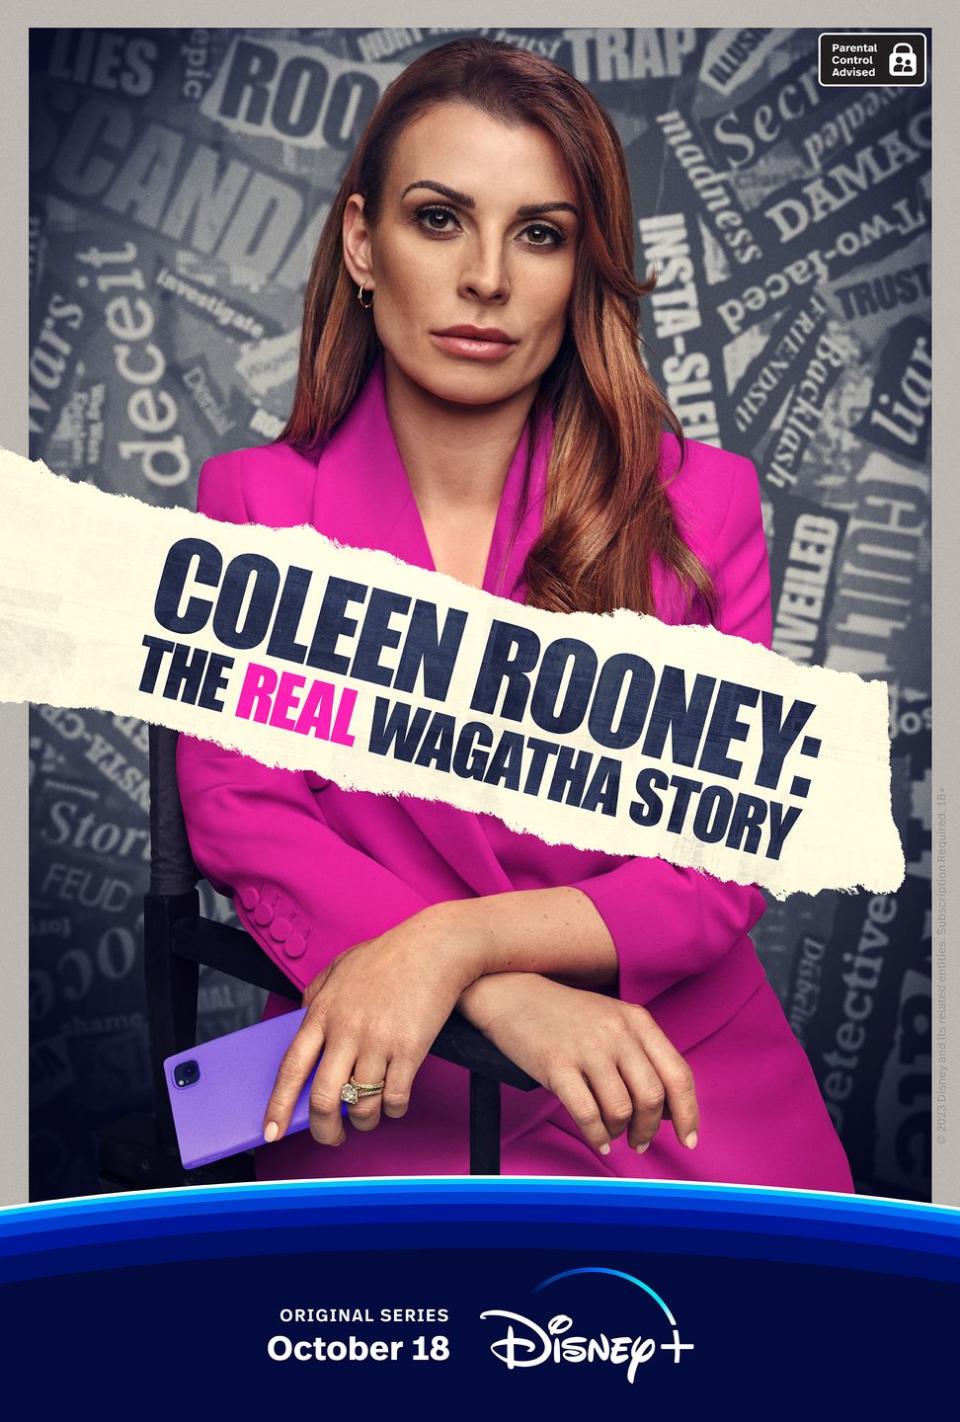 coleen rooney the real wagatha story poster